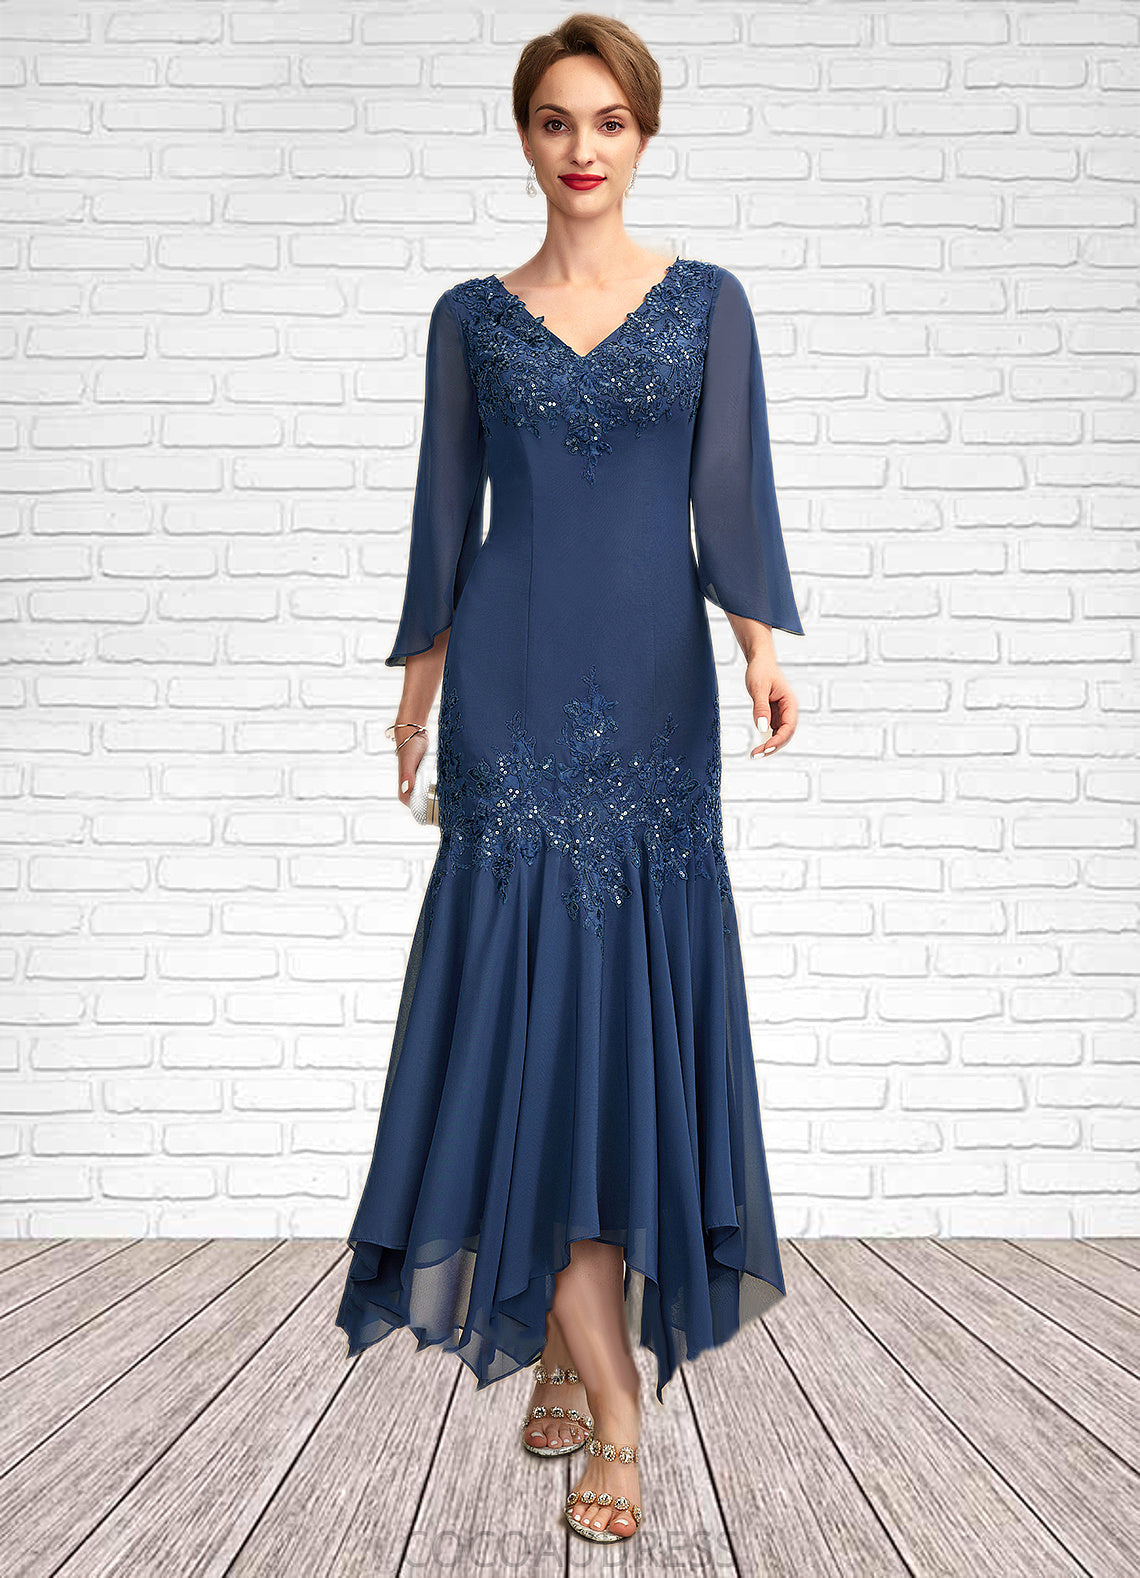 Autumn Trumpet/Mermaid V-neck Ankle-Length Chiffon Mother of the Bride Dress With Appliques Lace Sequins 126P0015009